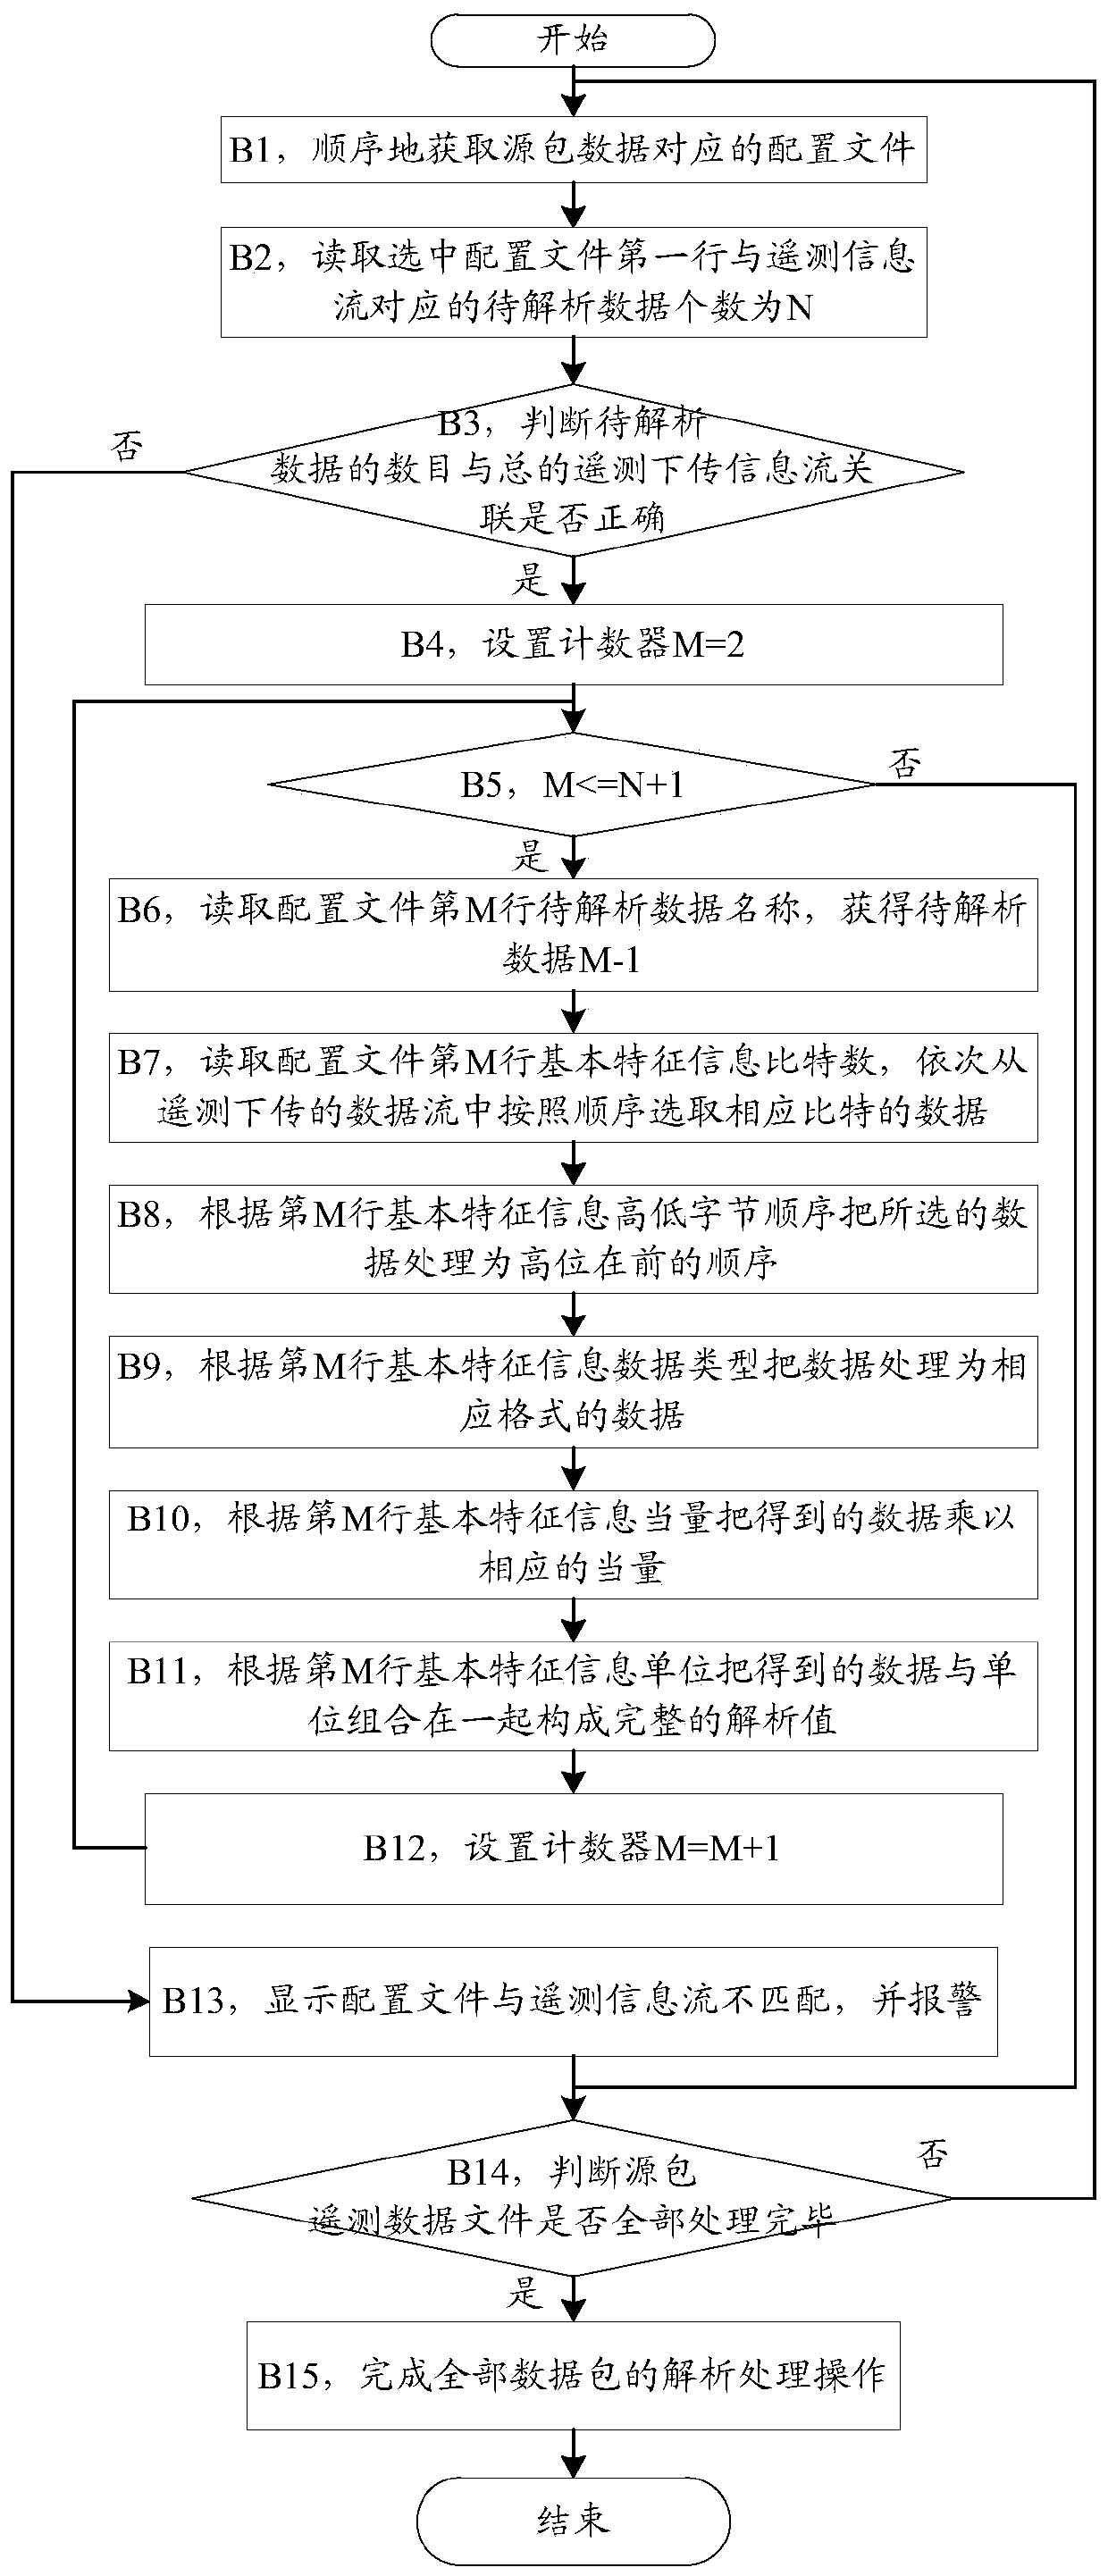 Data fusion and association processing method